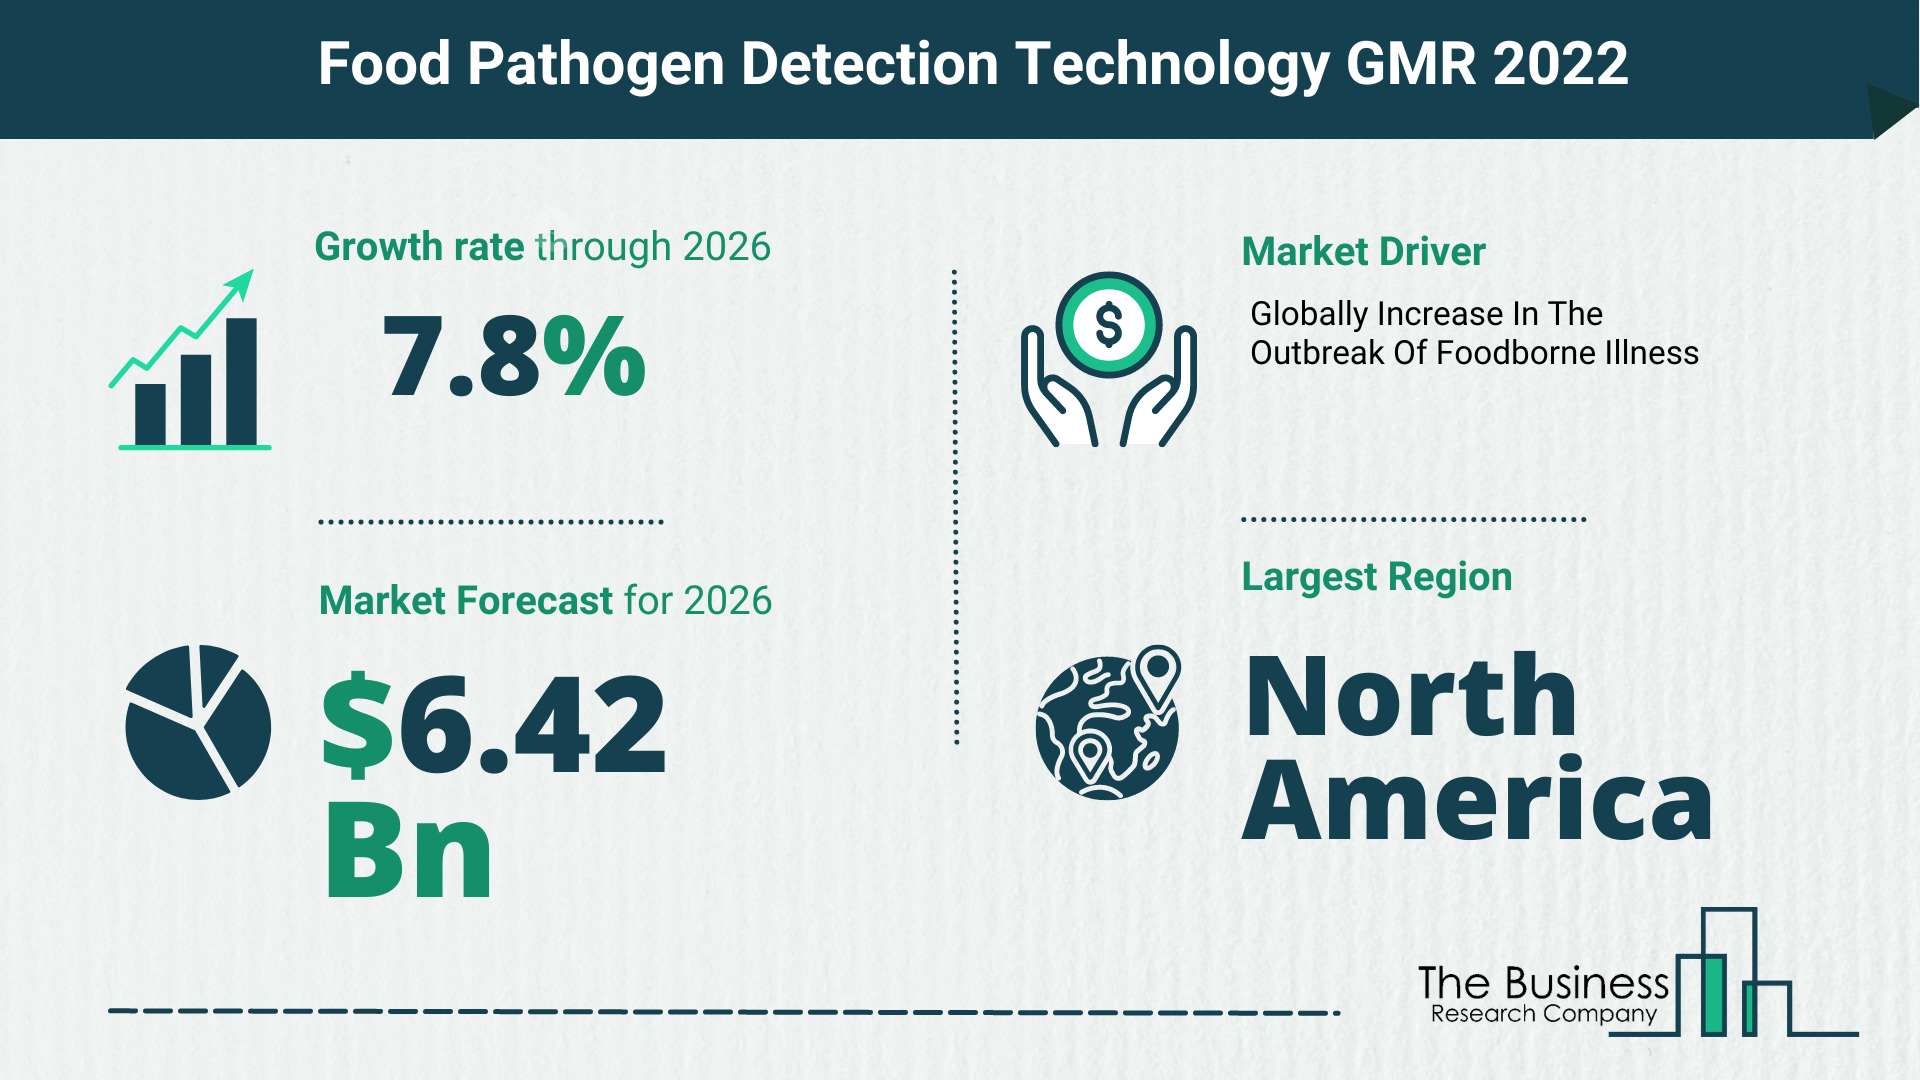 How Will The Food Pathogen Detection Technology Market Grow In 2022?